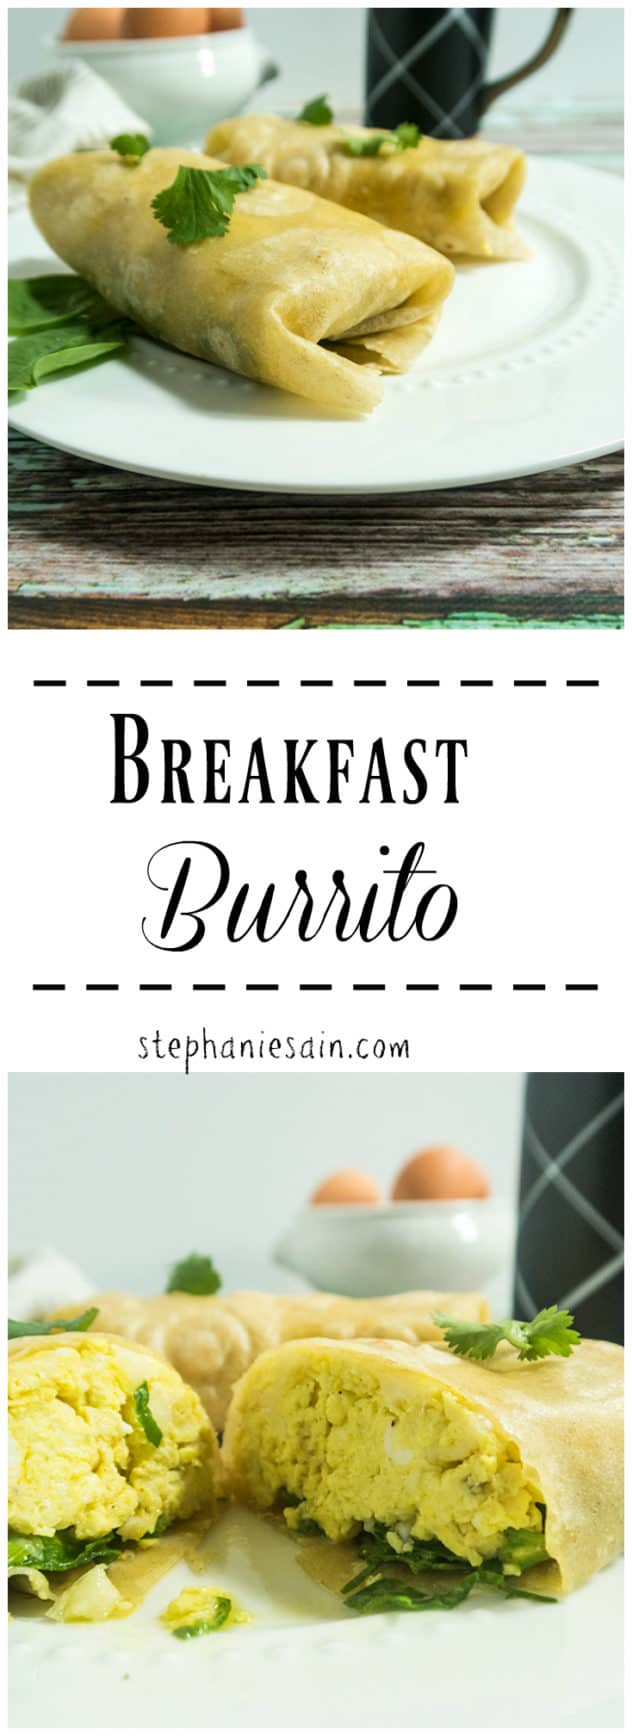 This Breakfast Burrito is the perfect Way to start the day. Loaded with scrambled eggs, spinach, and garlic for a tasty satisfying breakfast or brunch. Vegetarian & Gluten Free.